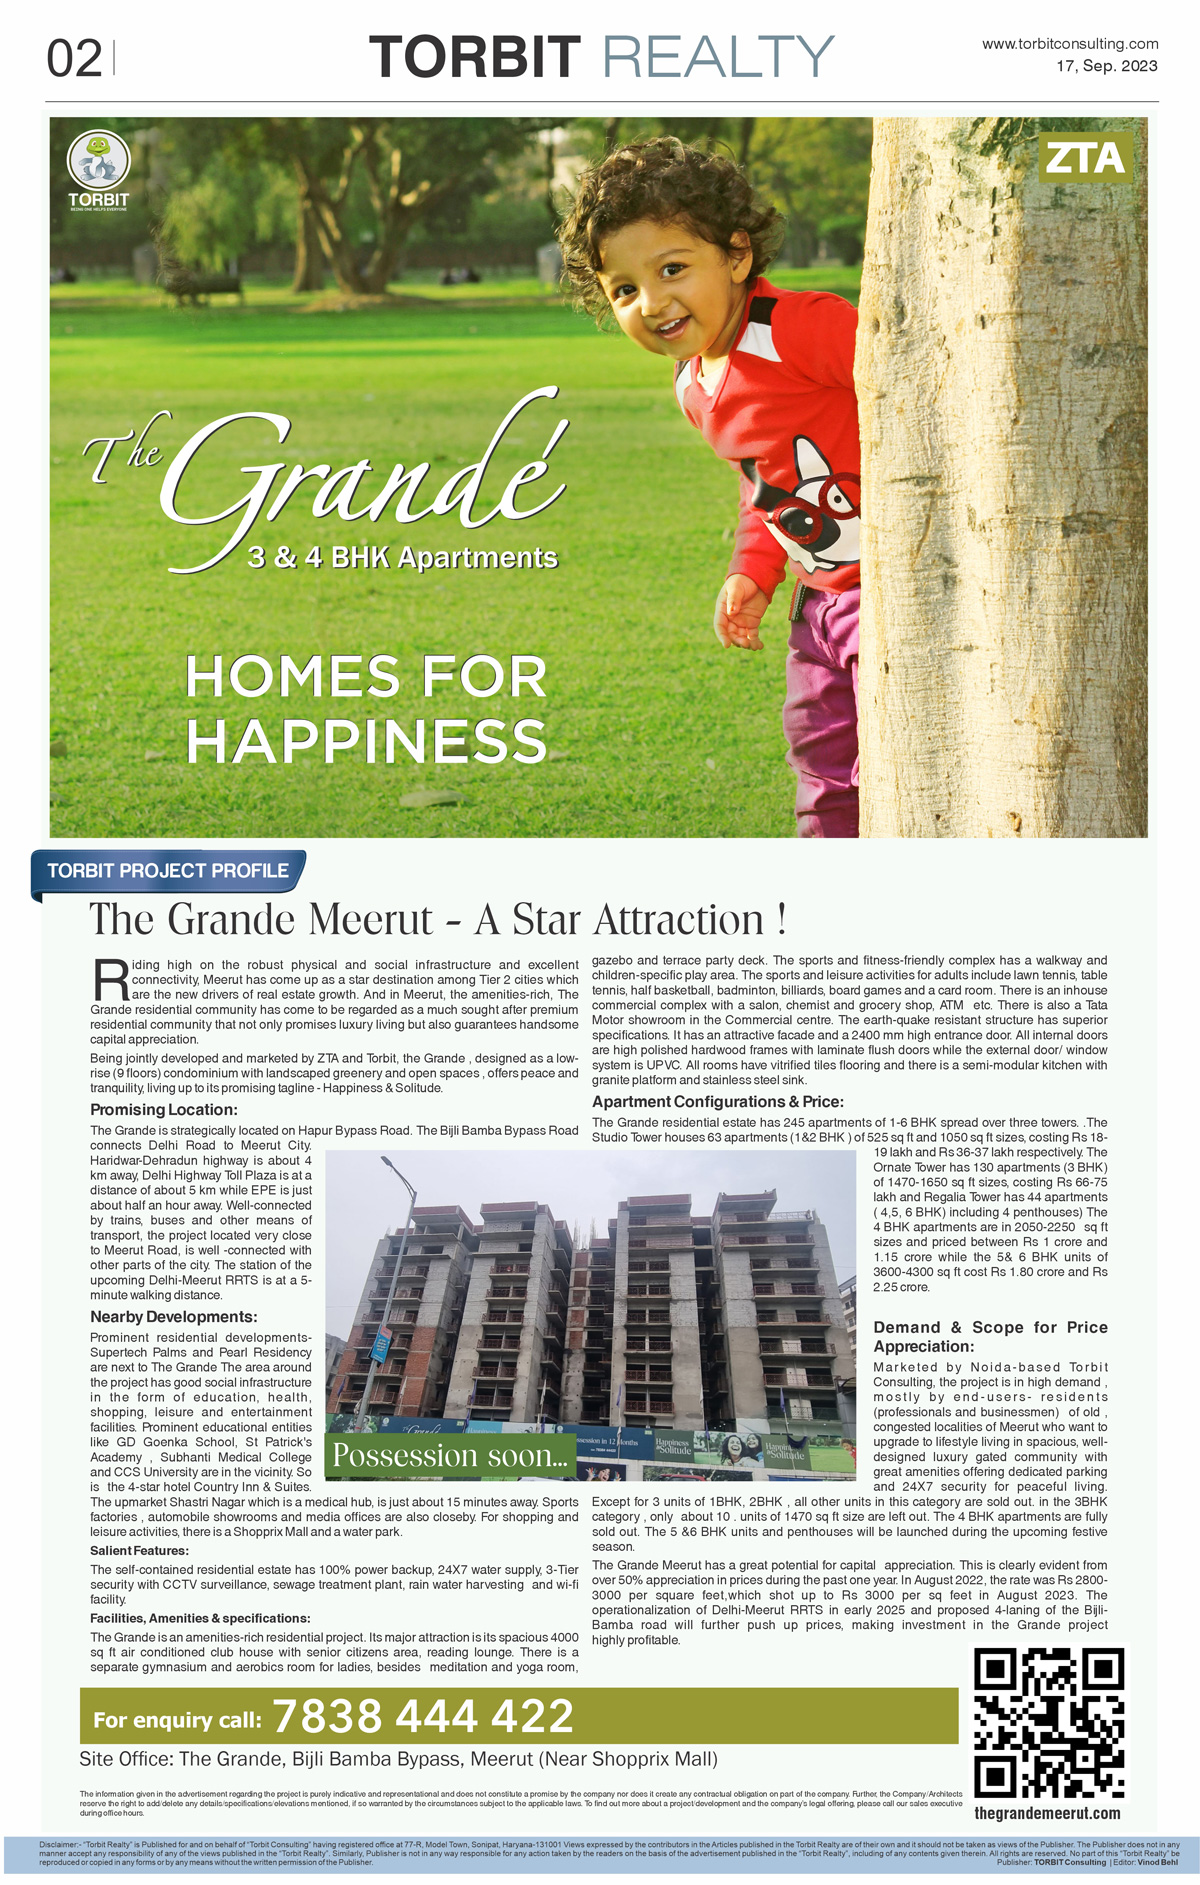 The Grande Meerut - A Star Attraction !